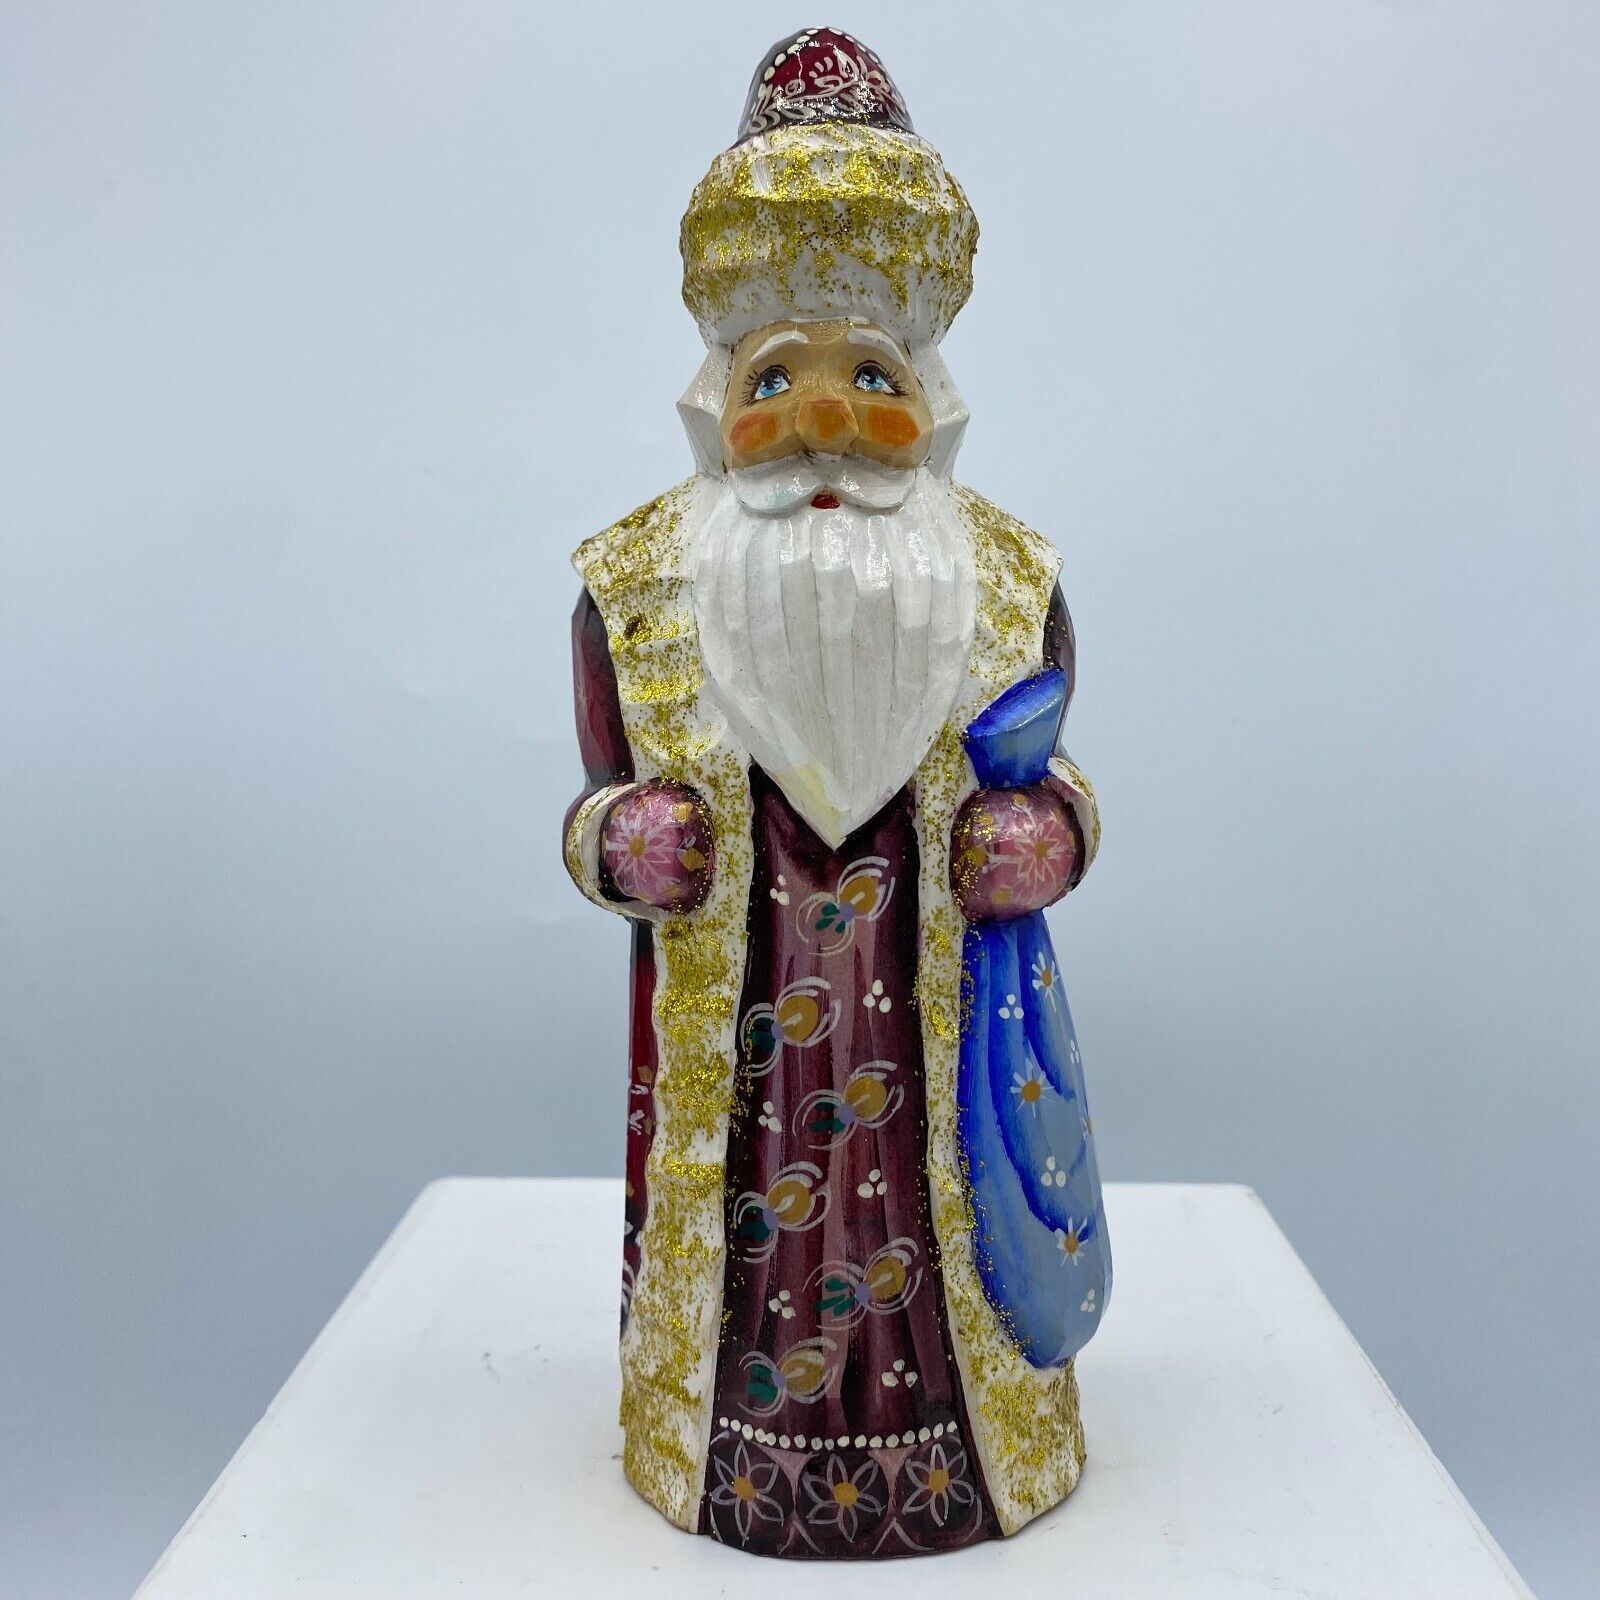 Beautiful Hand Carved Wooden 7” Tall Santa Claus Russian Figurine Signed – Nice